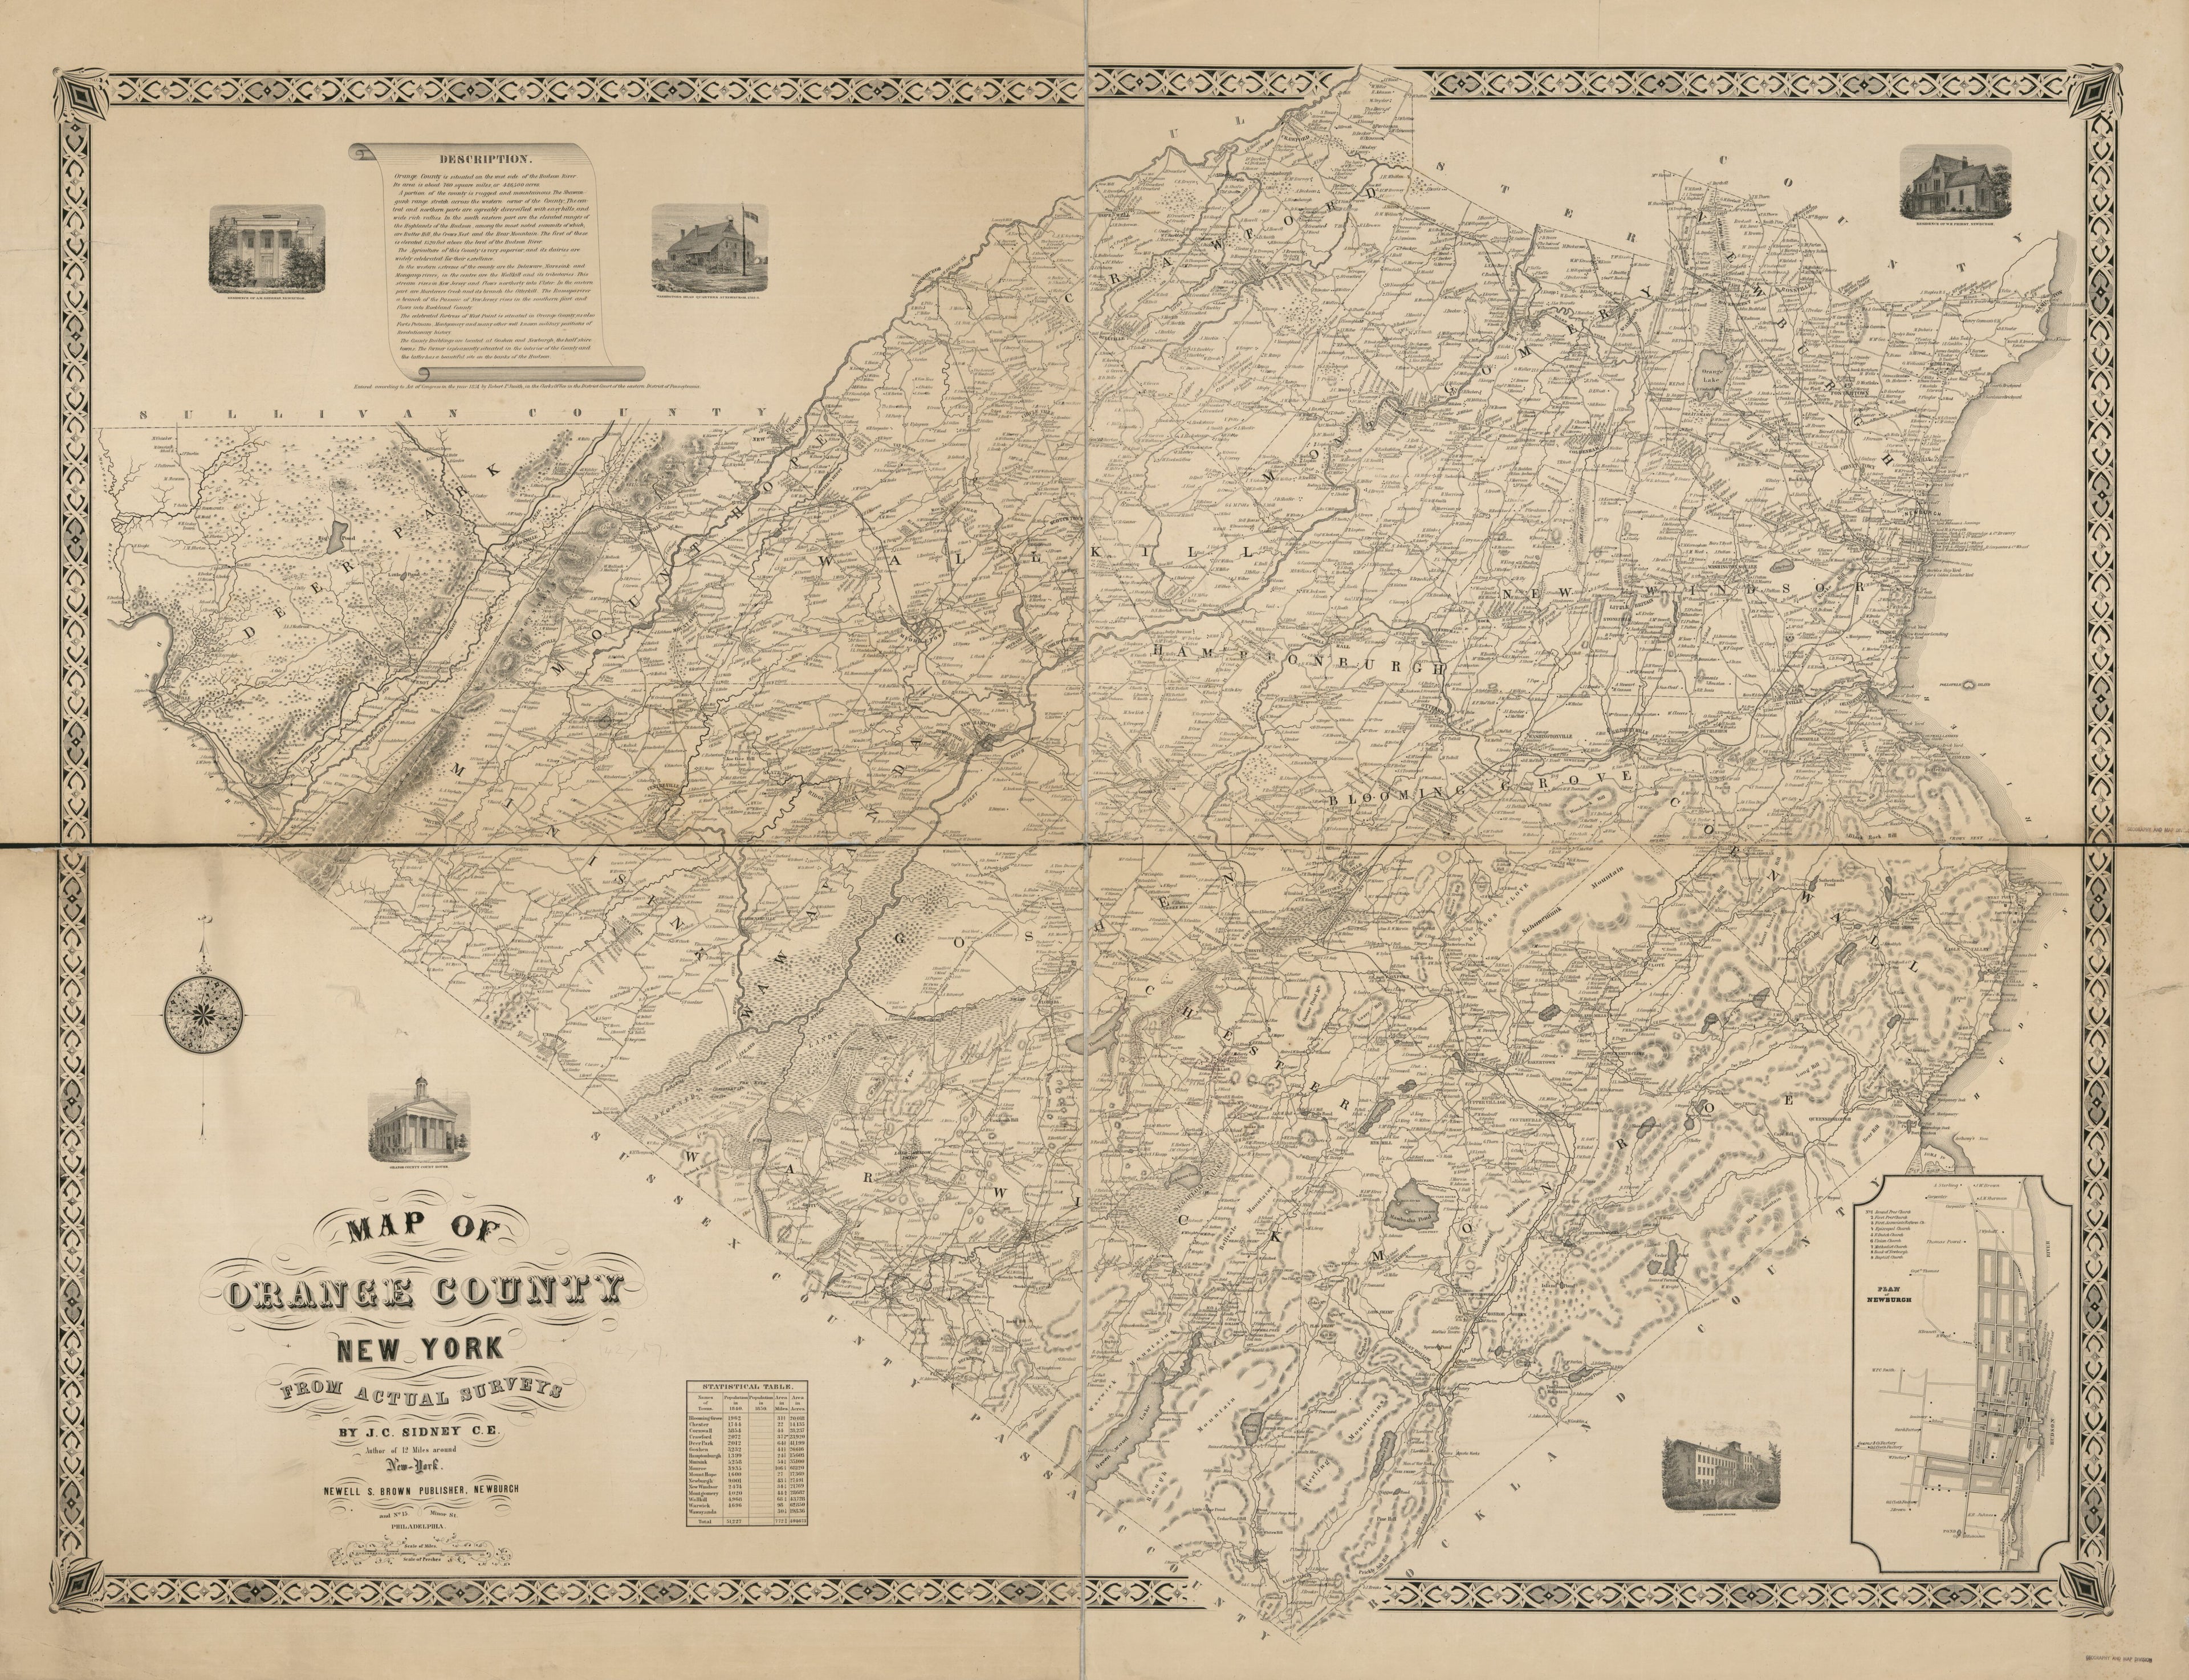 This old map of Map of Orange County New York : from Actual Surveys from 1851 was created by Newel S. Brown, J. C. (James C.) Sidney, Robert Pearsall Smith in 1851